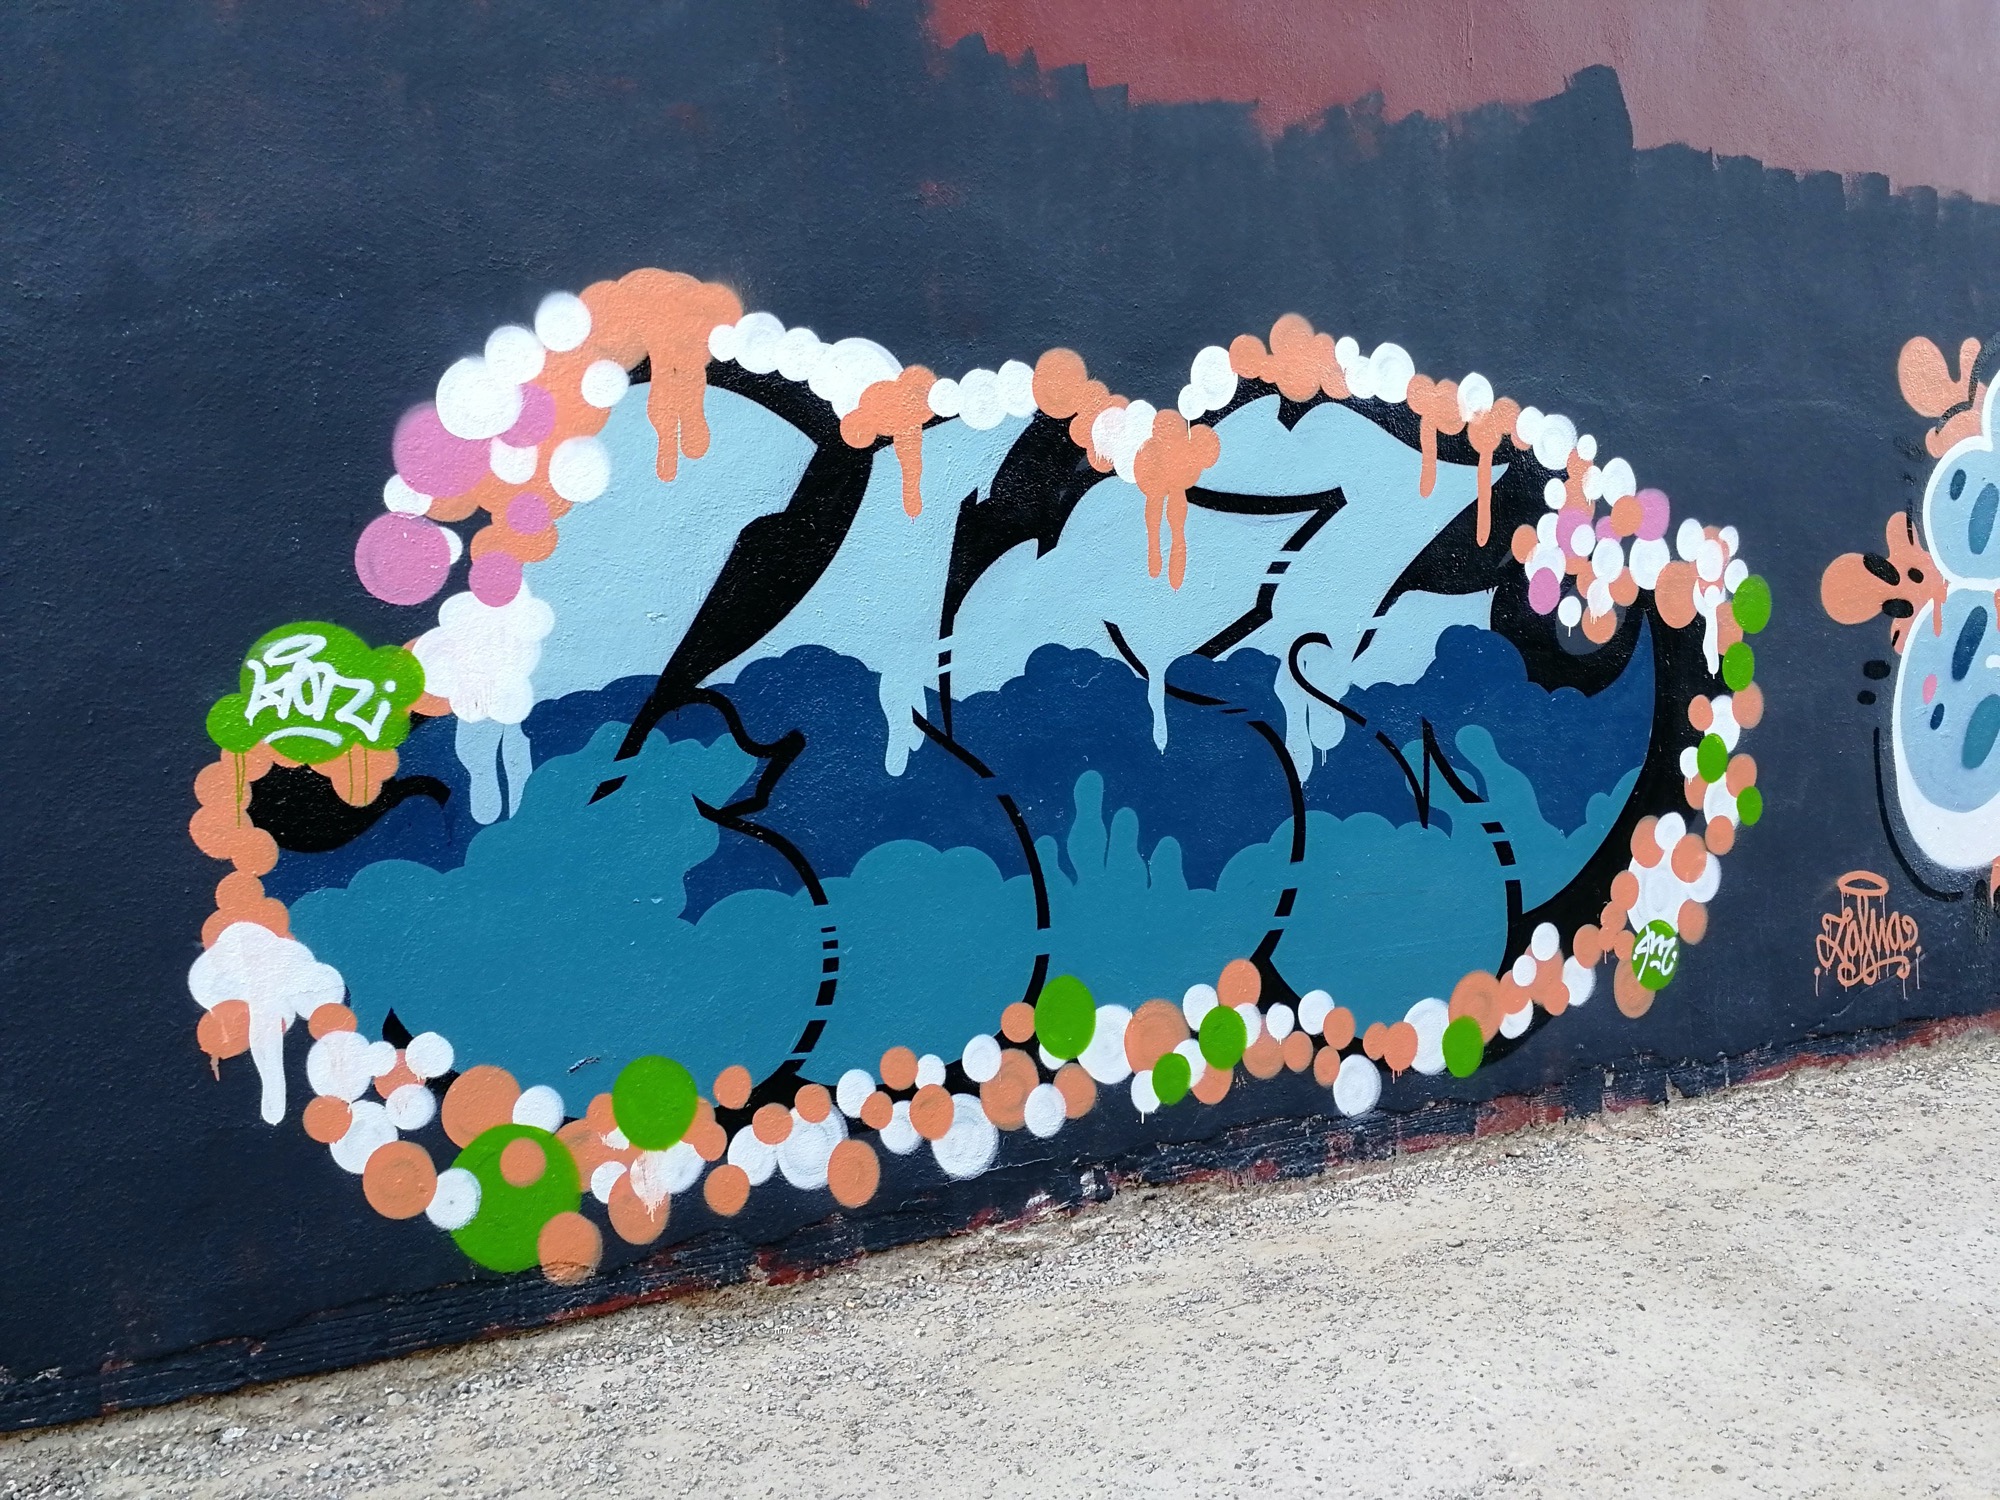 Graffiti 3455  captured by Rabot in València Spain